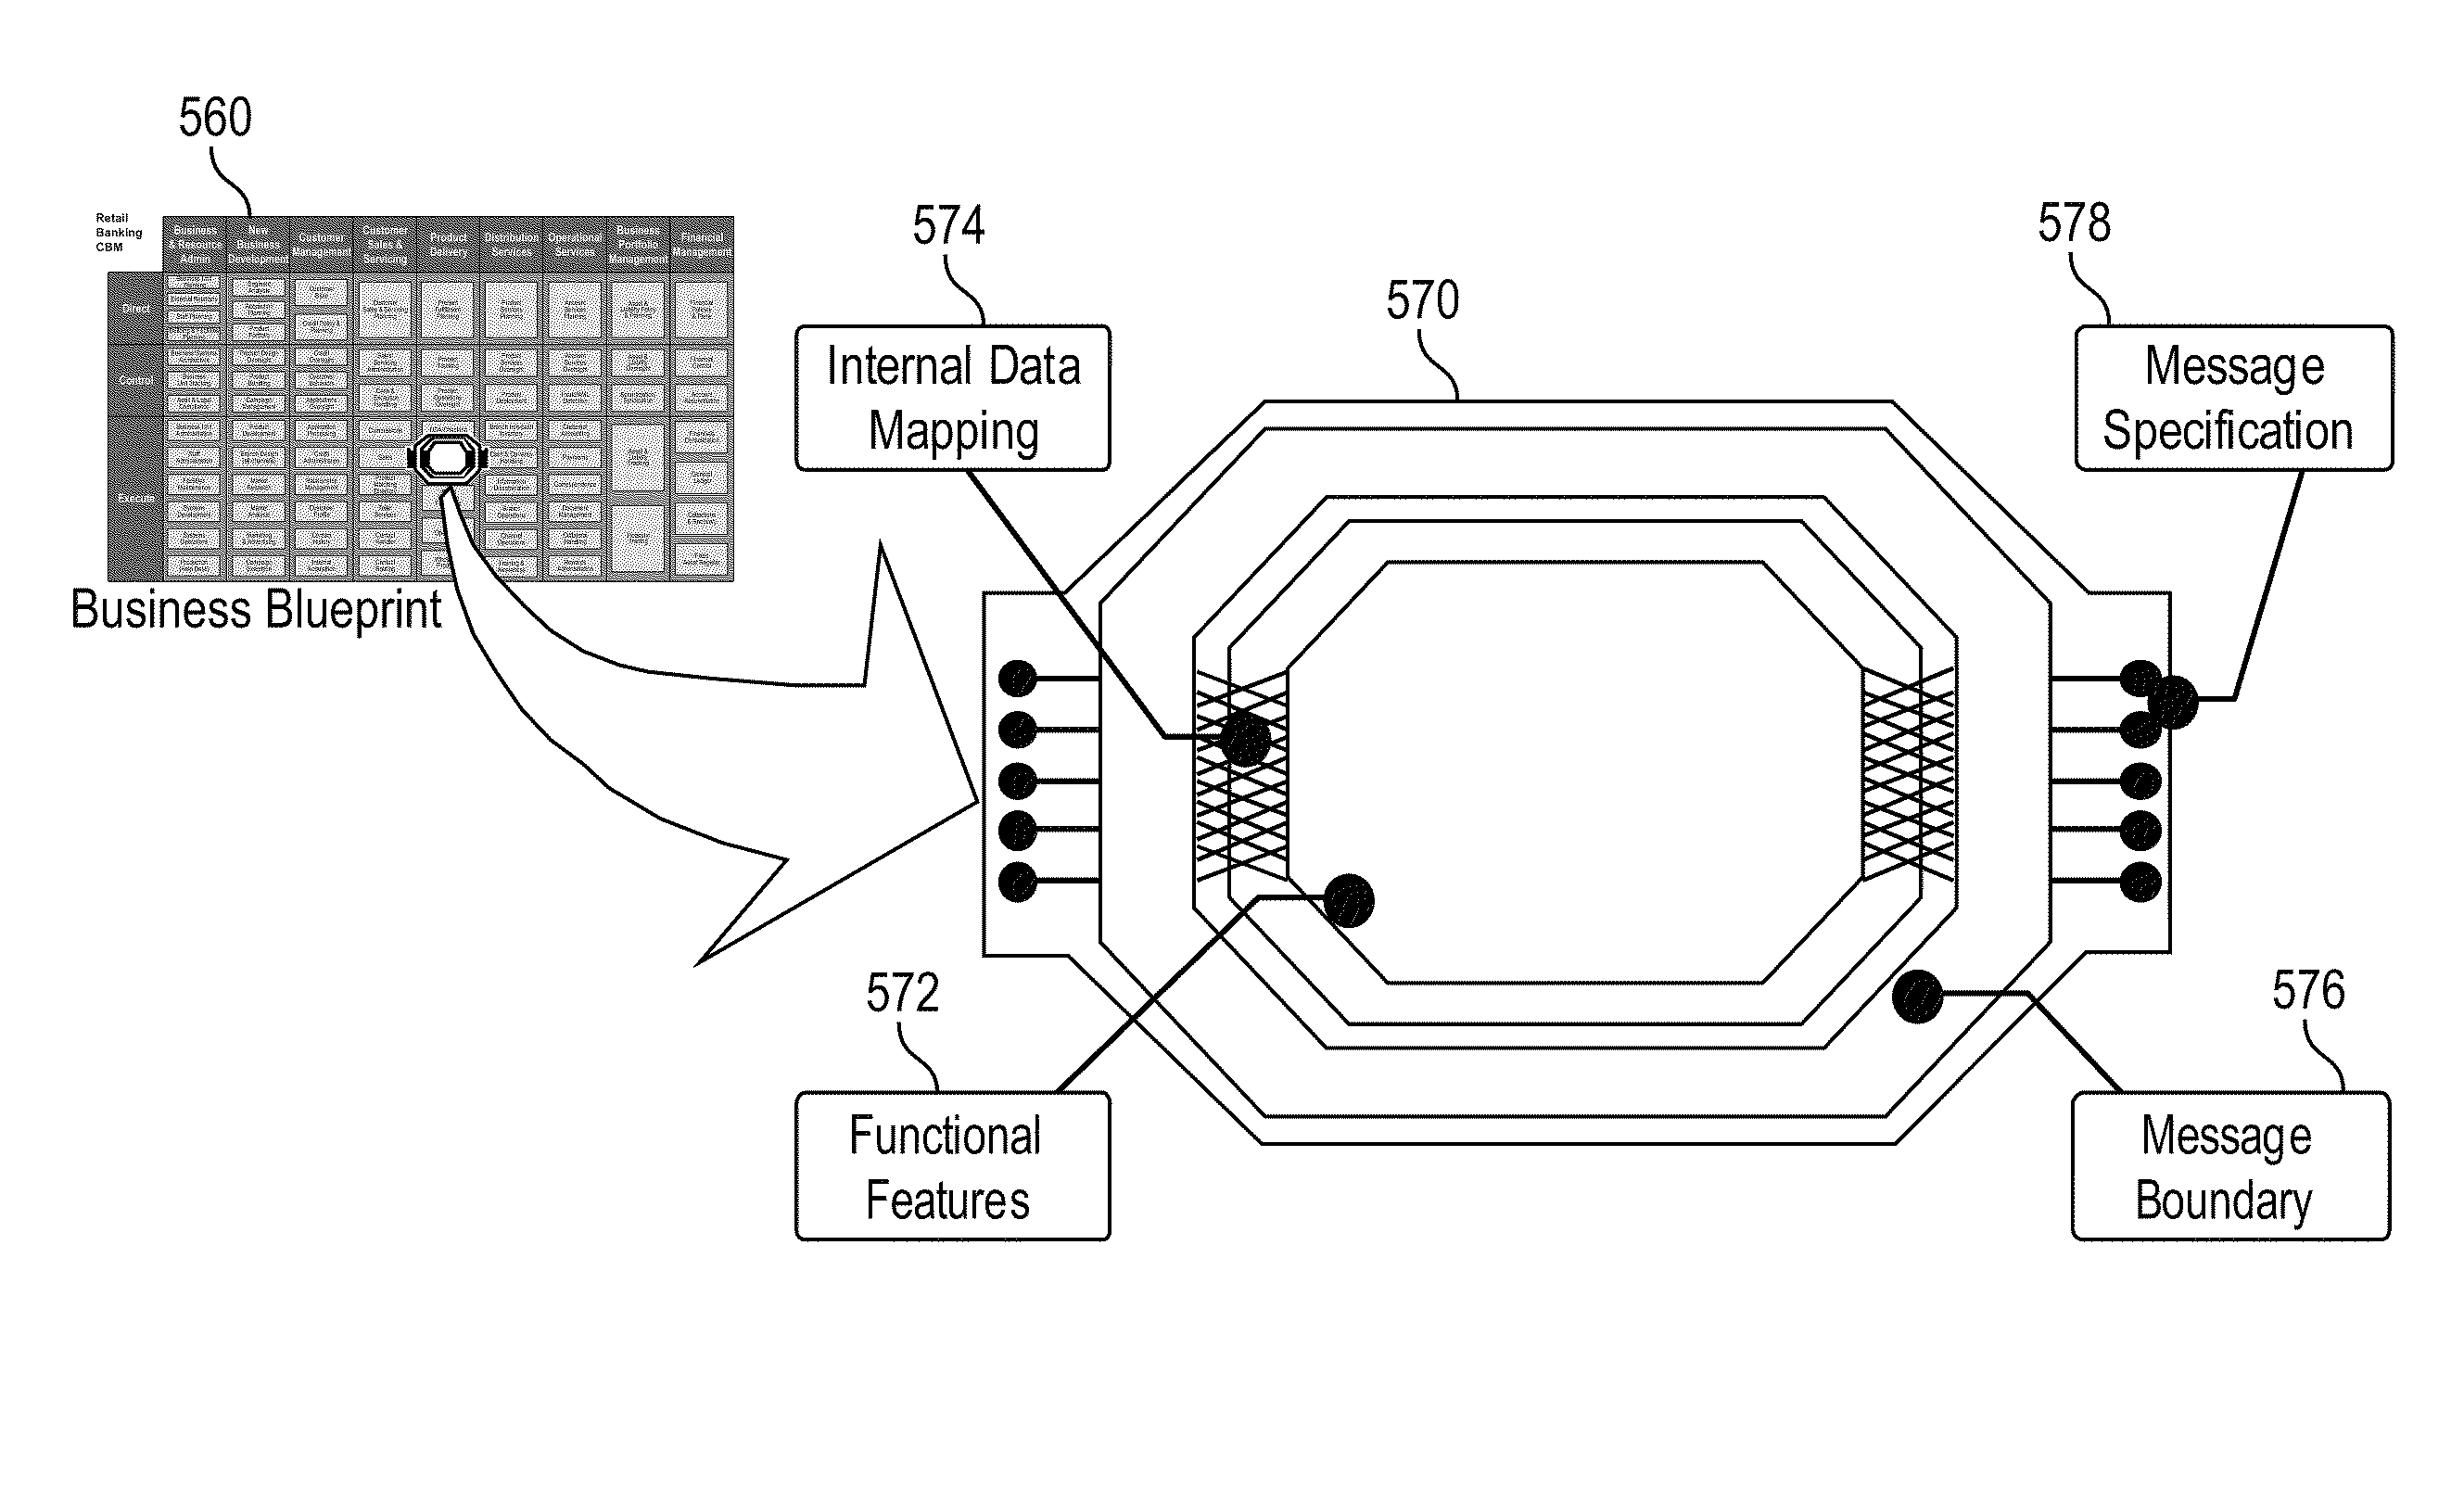 Method and system for assigning staff as a service in a service network within a component business model architecture